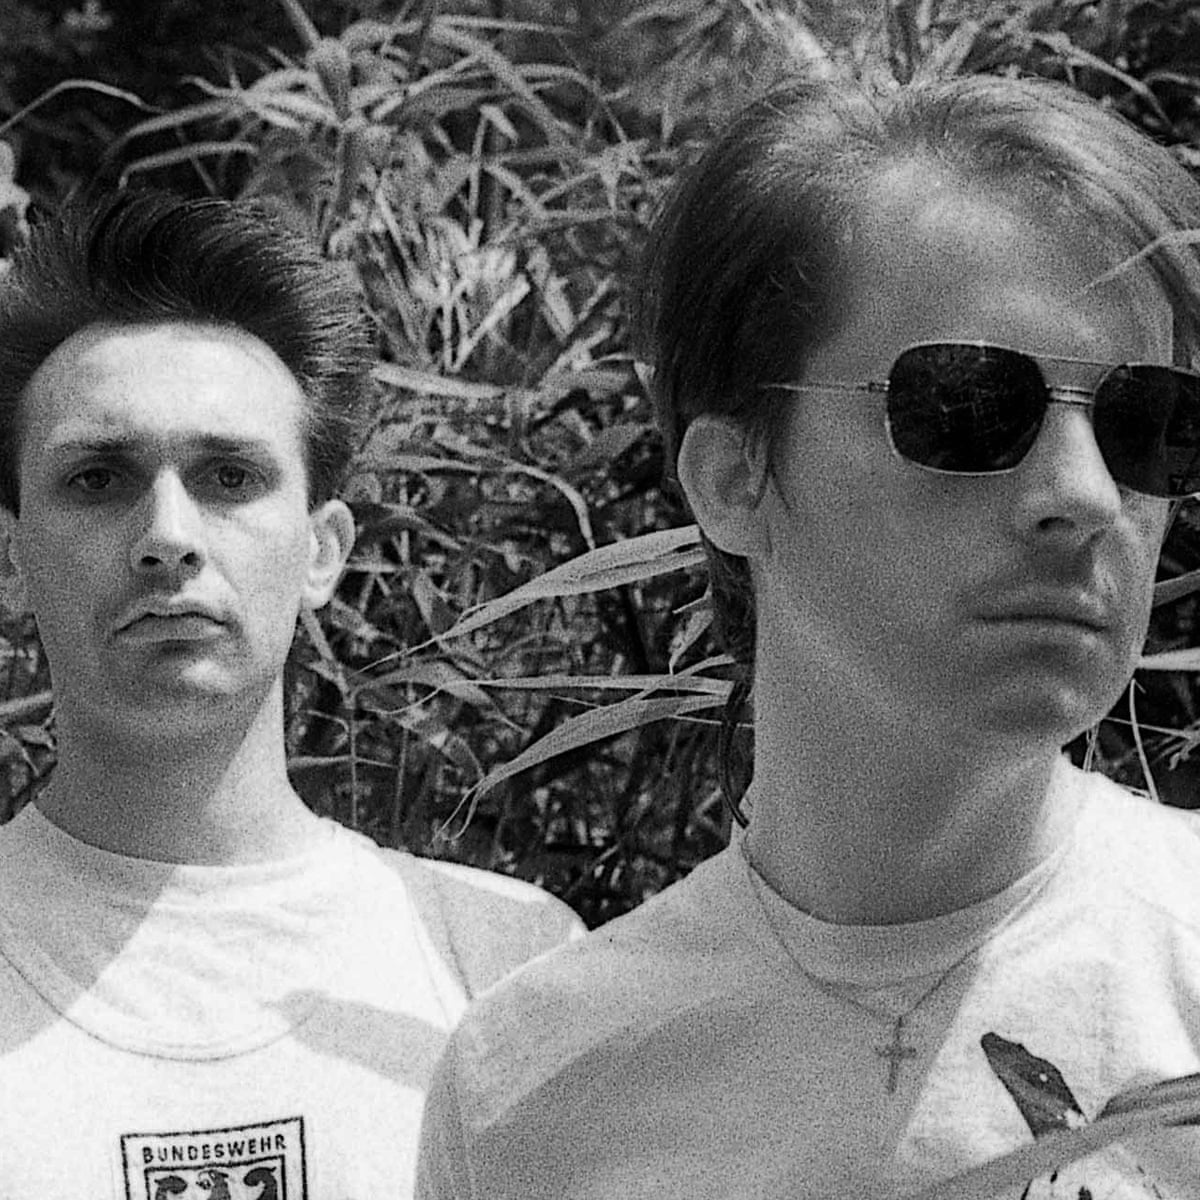 Richard H Kirk, founding member of Cabaret Voltaire, dies aged 65 | Music | The Guardian